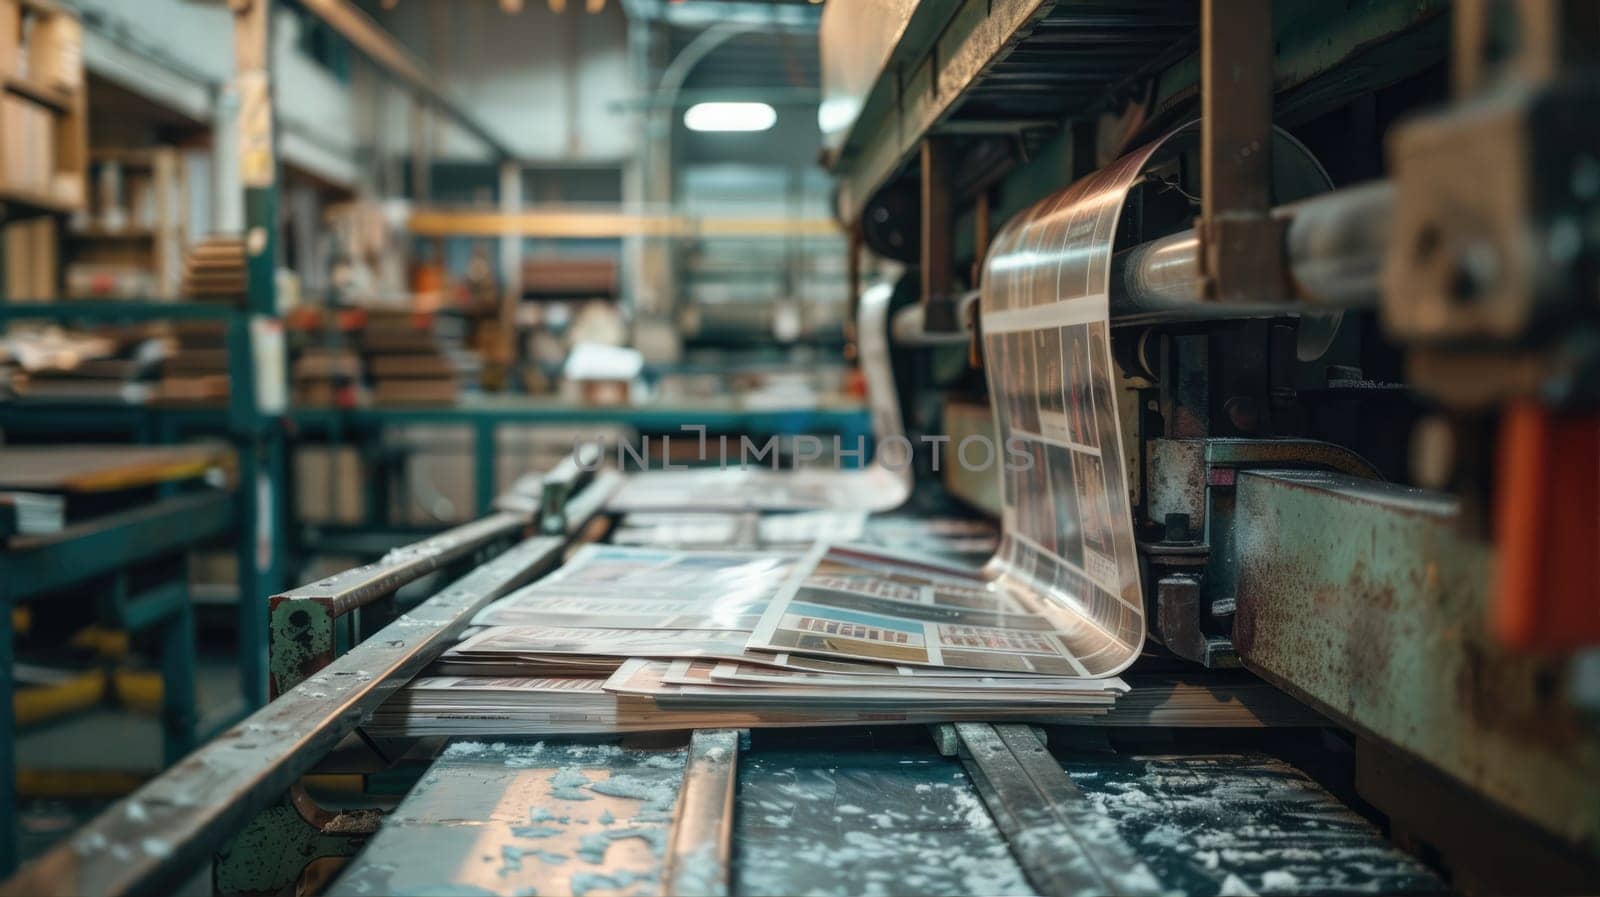 The process of printing magazines and newspapers AI